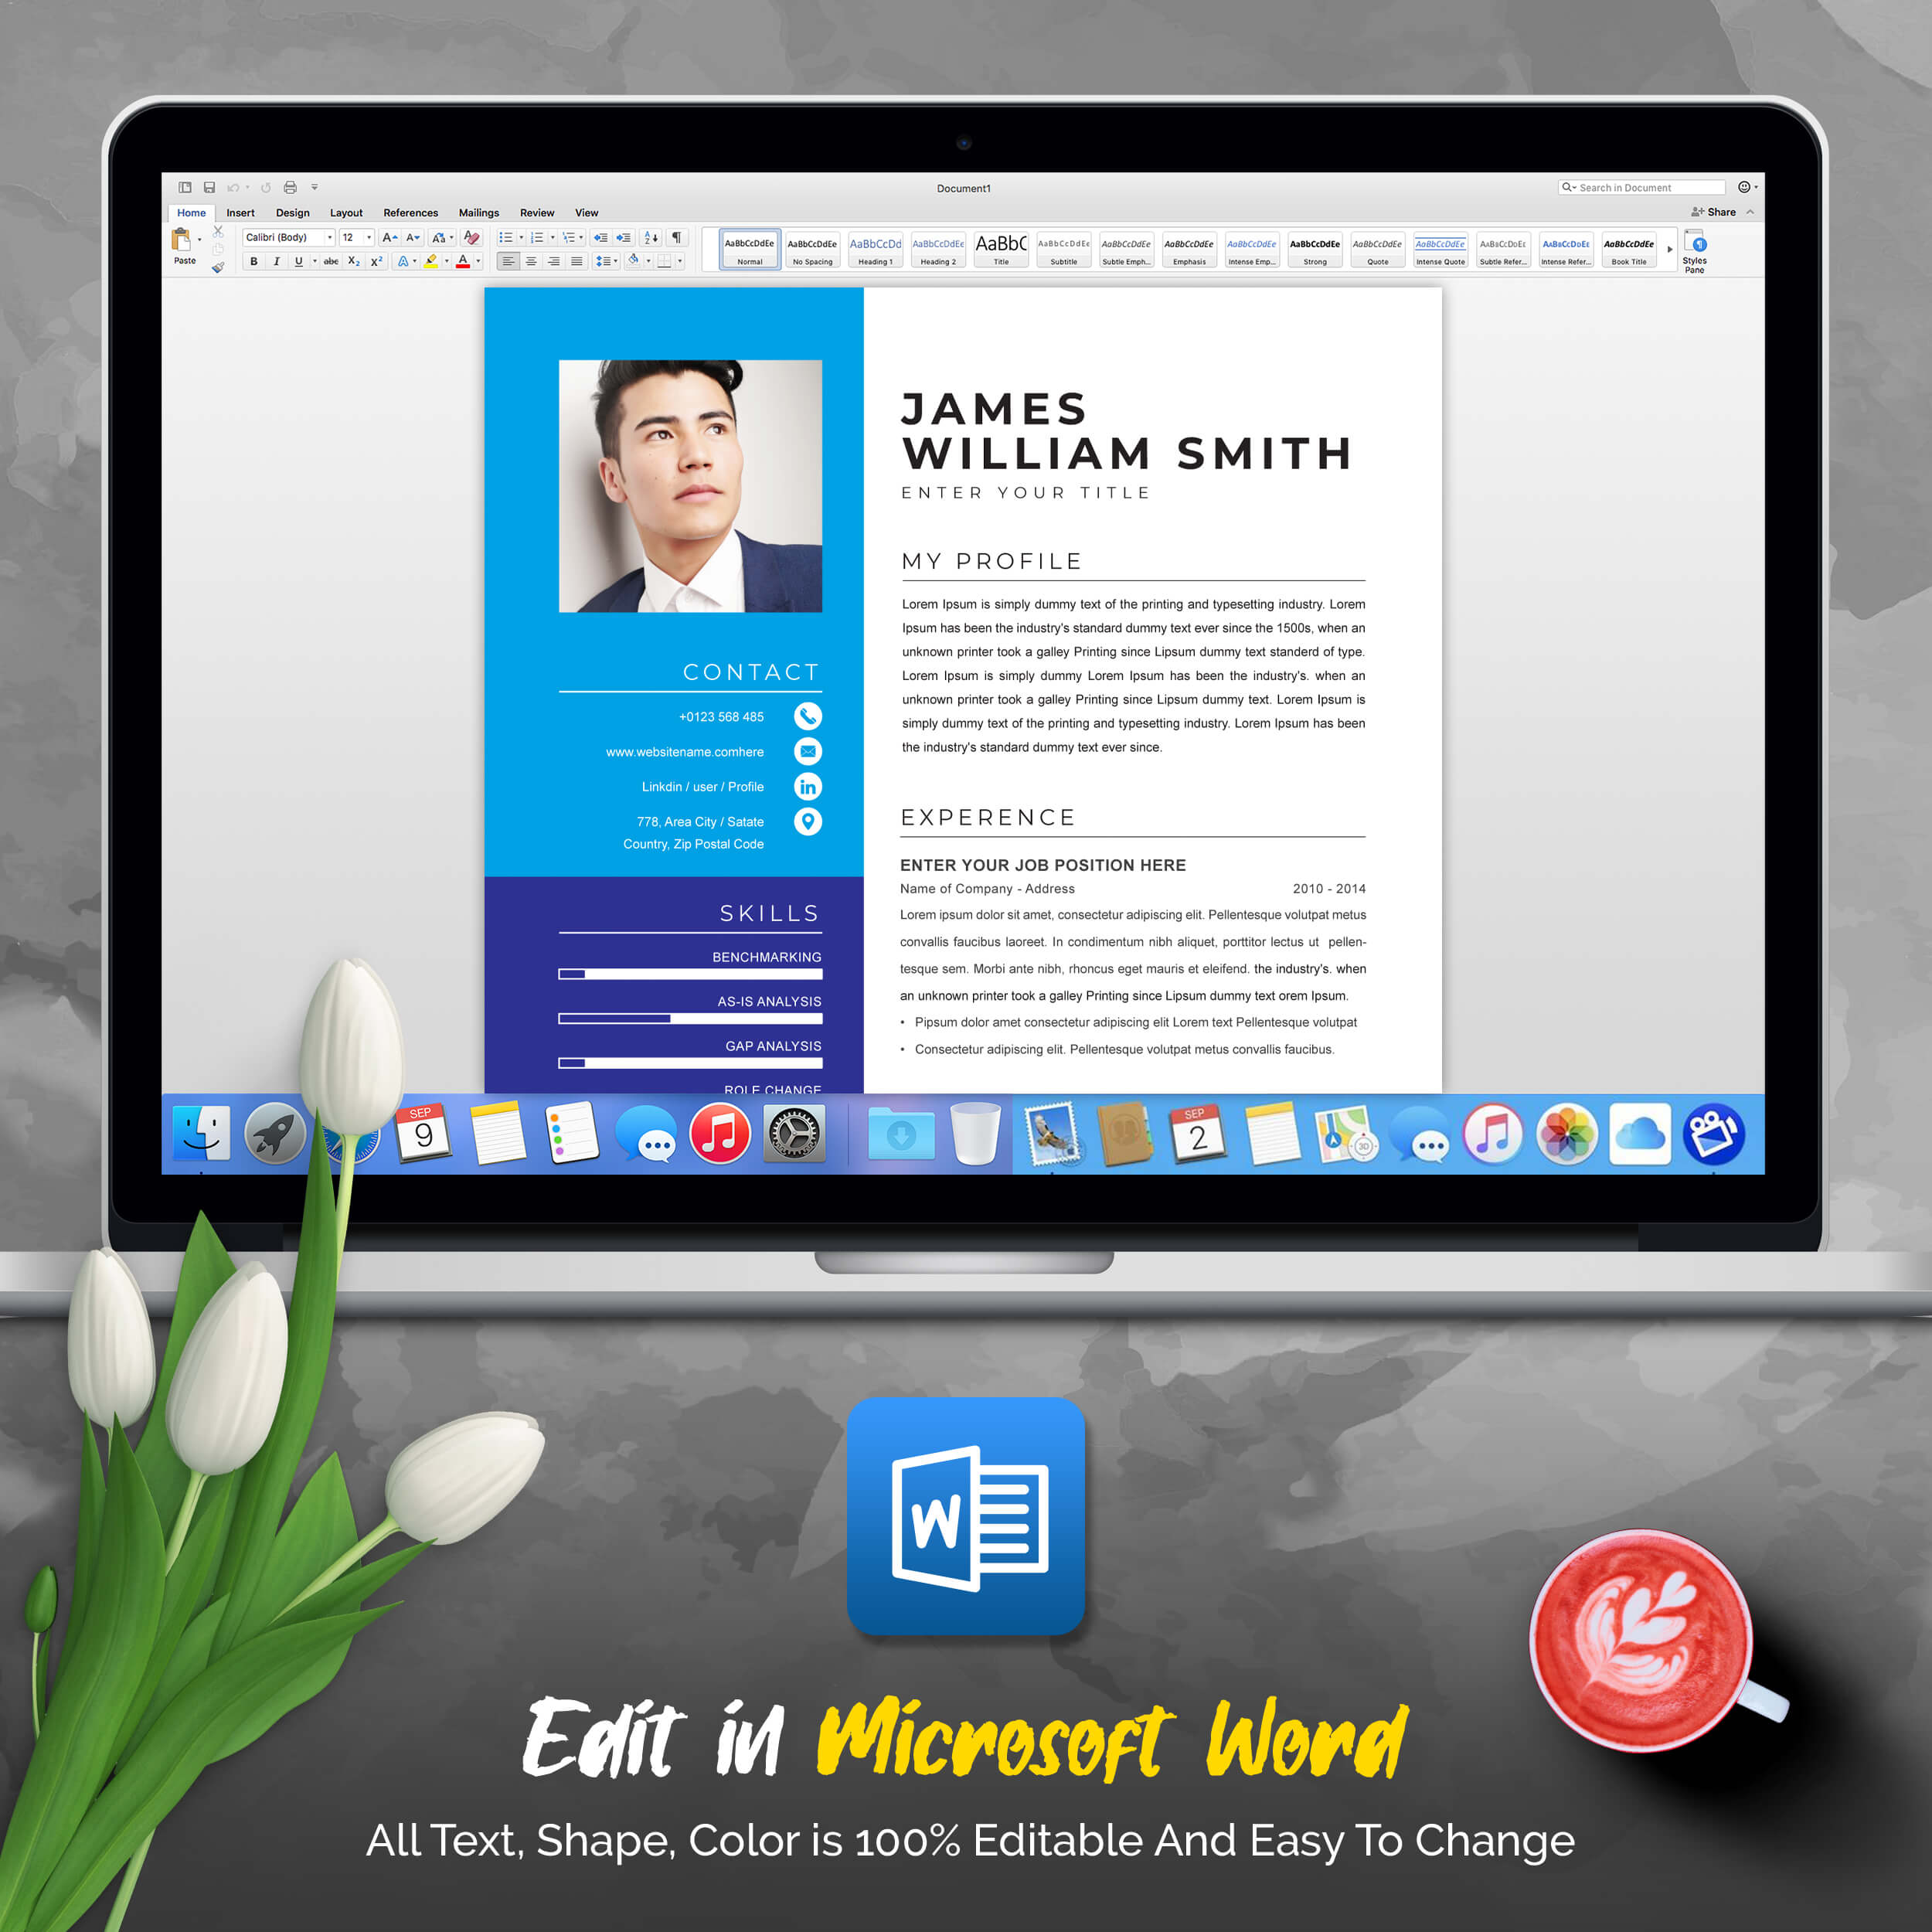 04 3 pages professional ms word aple pages eps photoshop psd resume cv design template design by resume inventor 739